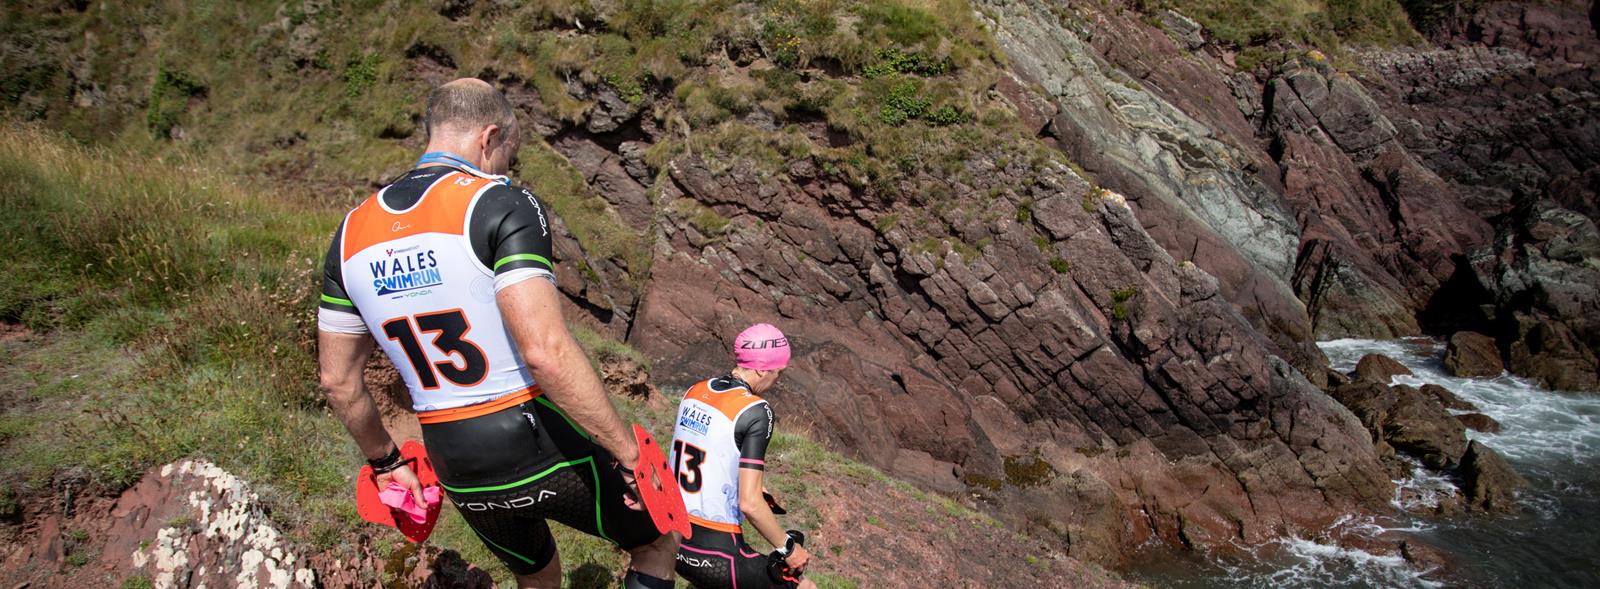 The Wales Swimrun to be Powered by Yonda Sports